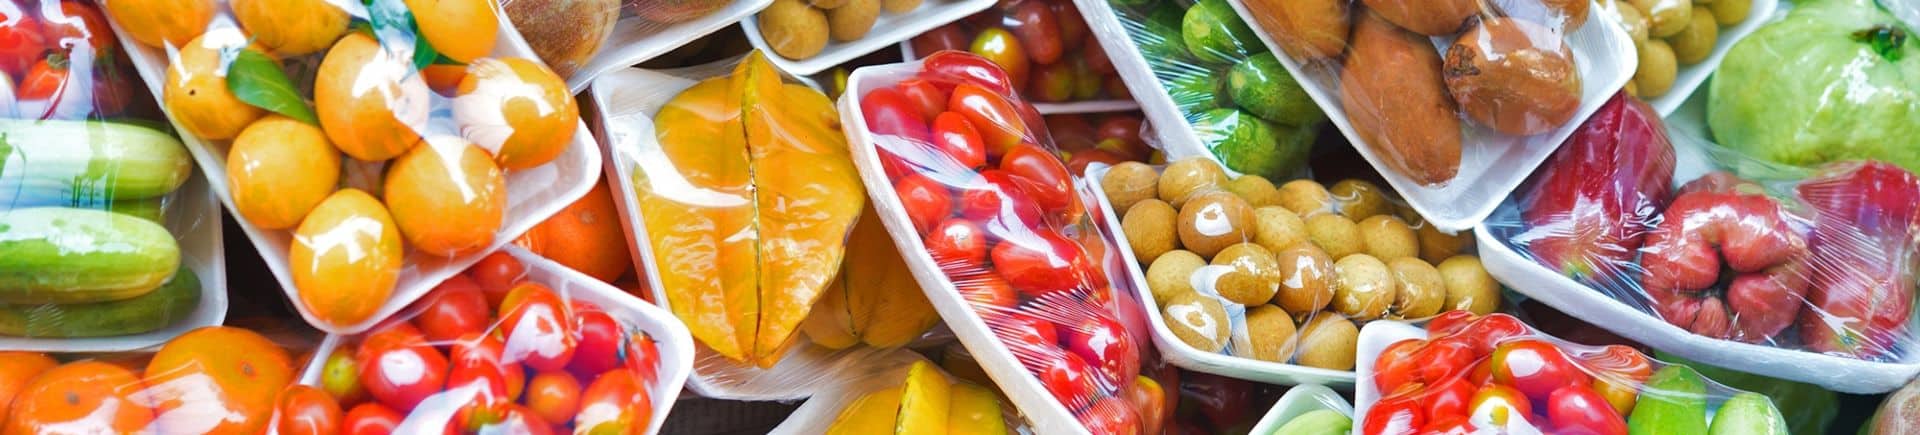 Packaged Fruits